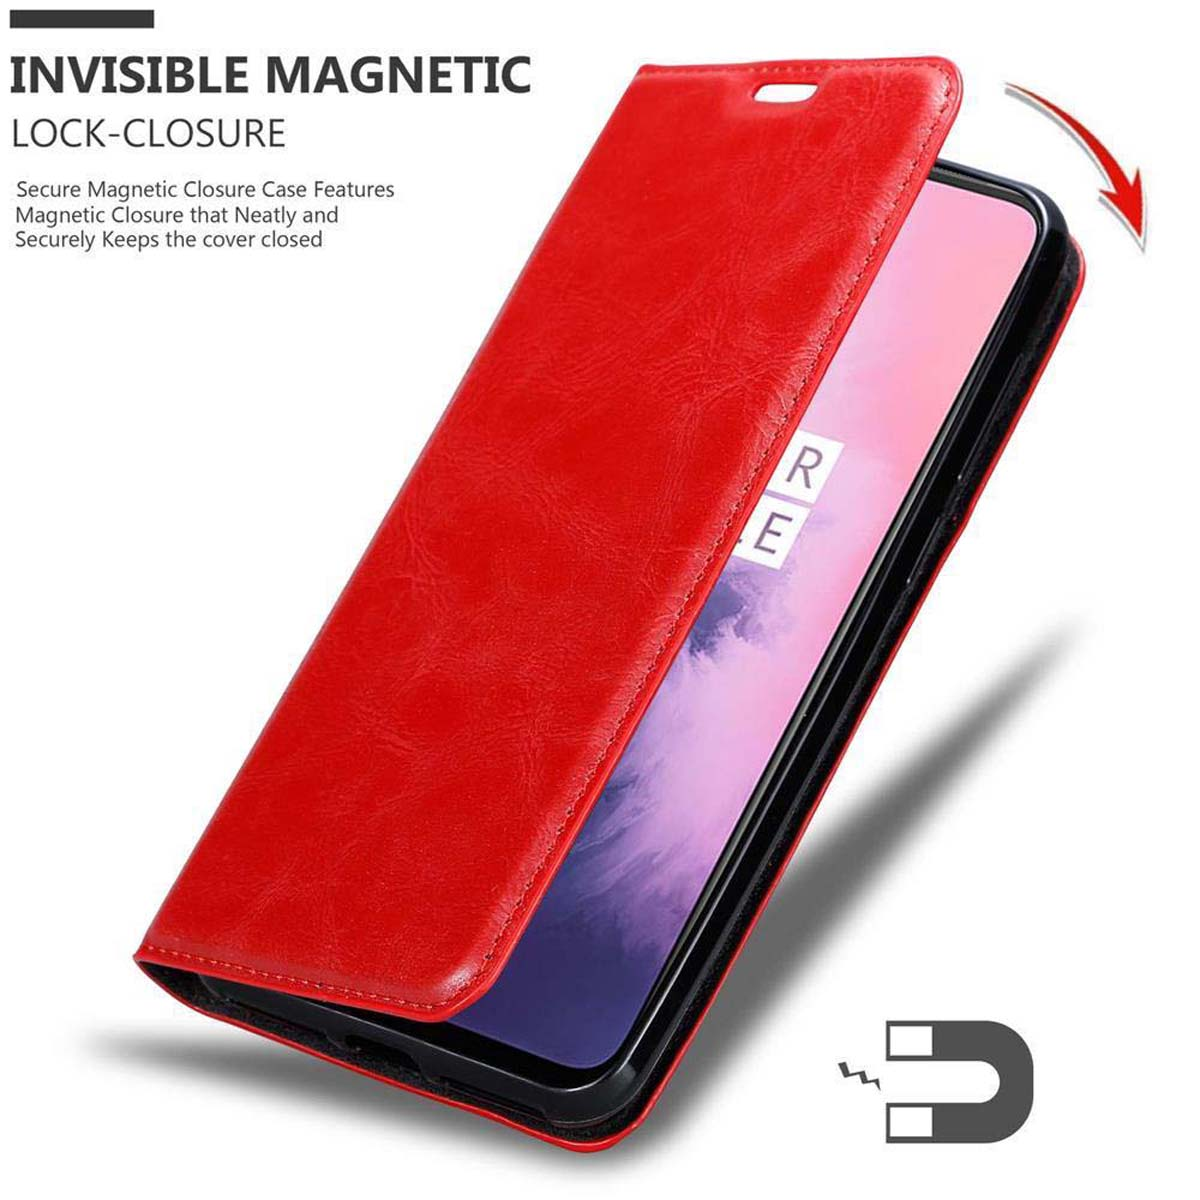 Magnet, Hülle 6T, Invisible Book CADORABO OnePlus, ROT APFEL Bookcover,